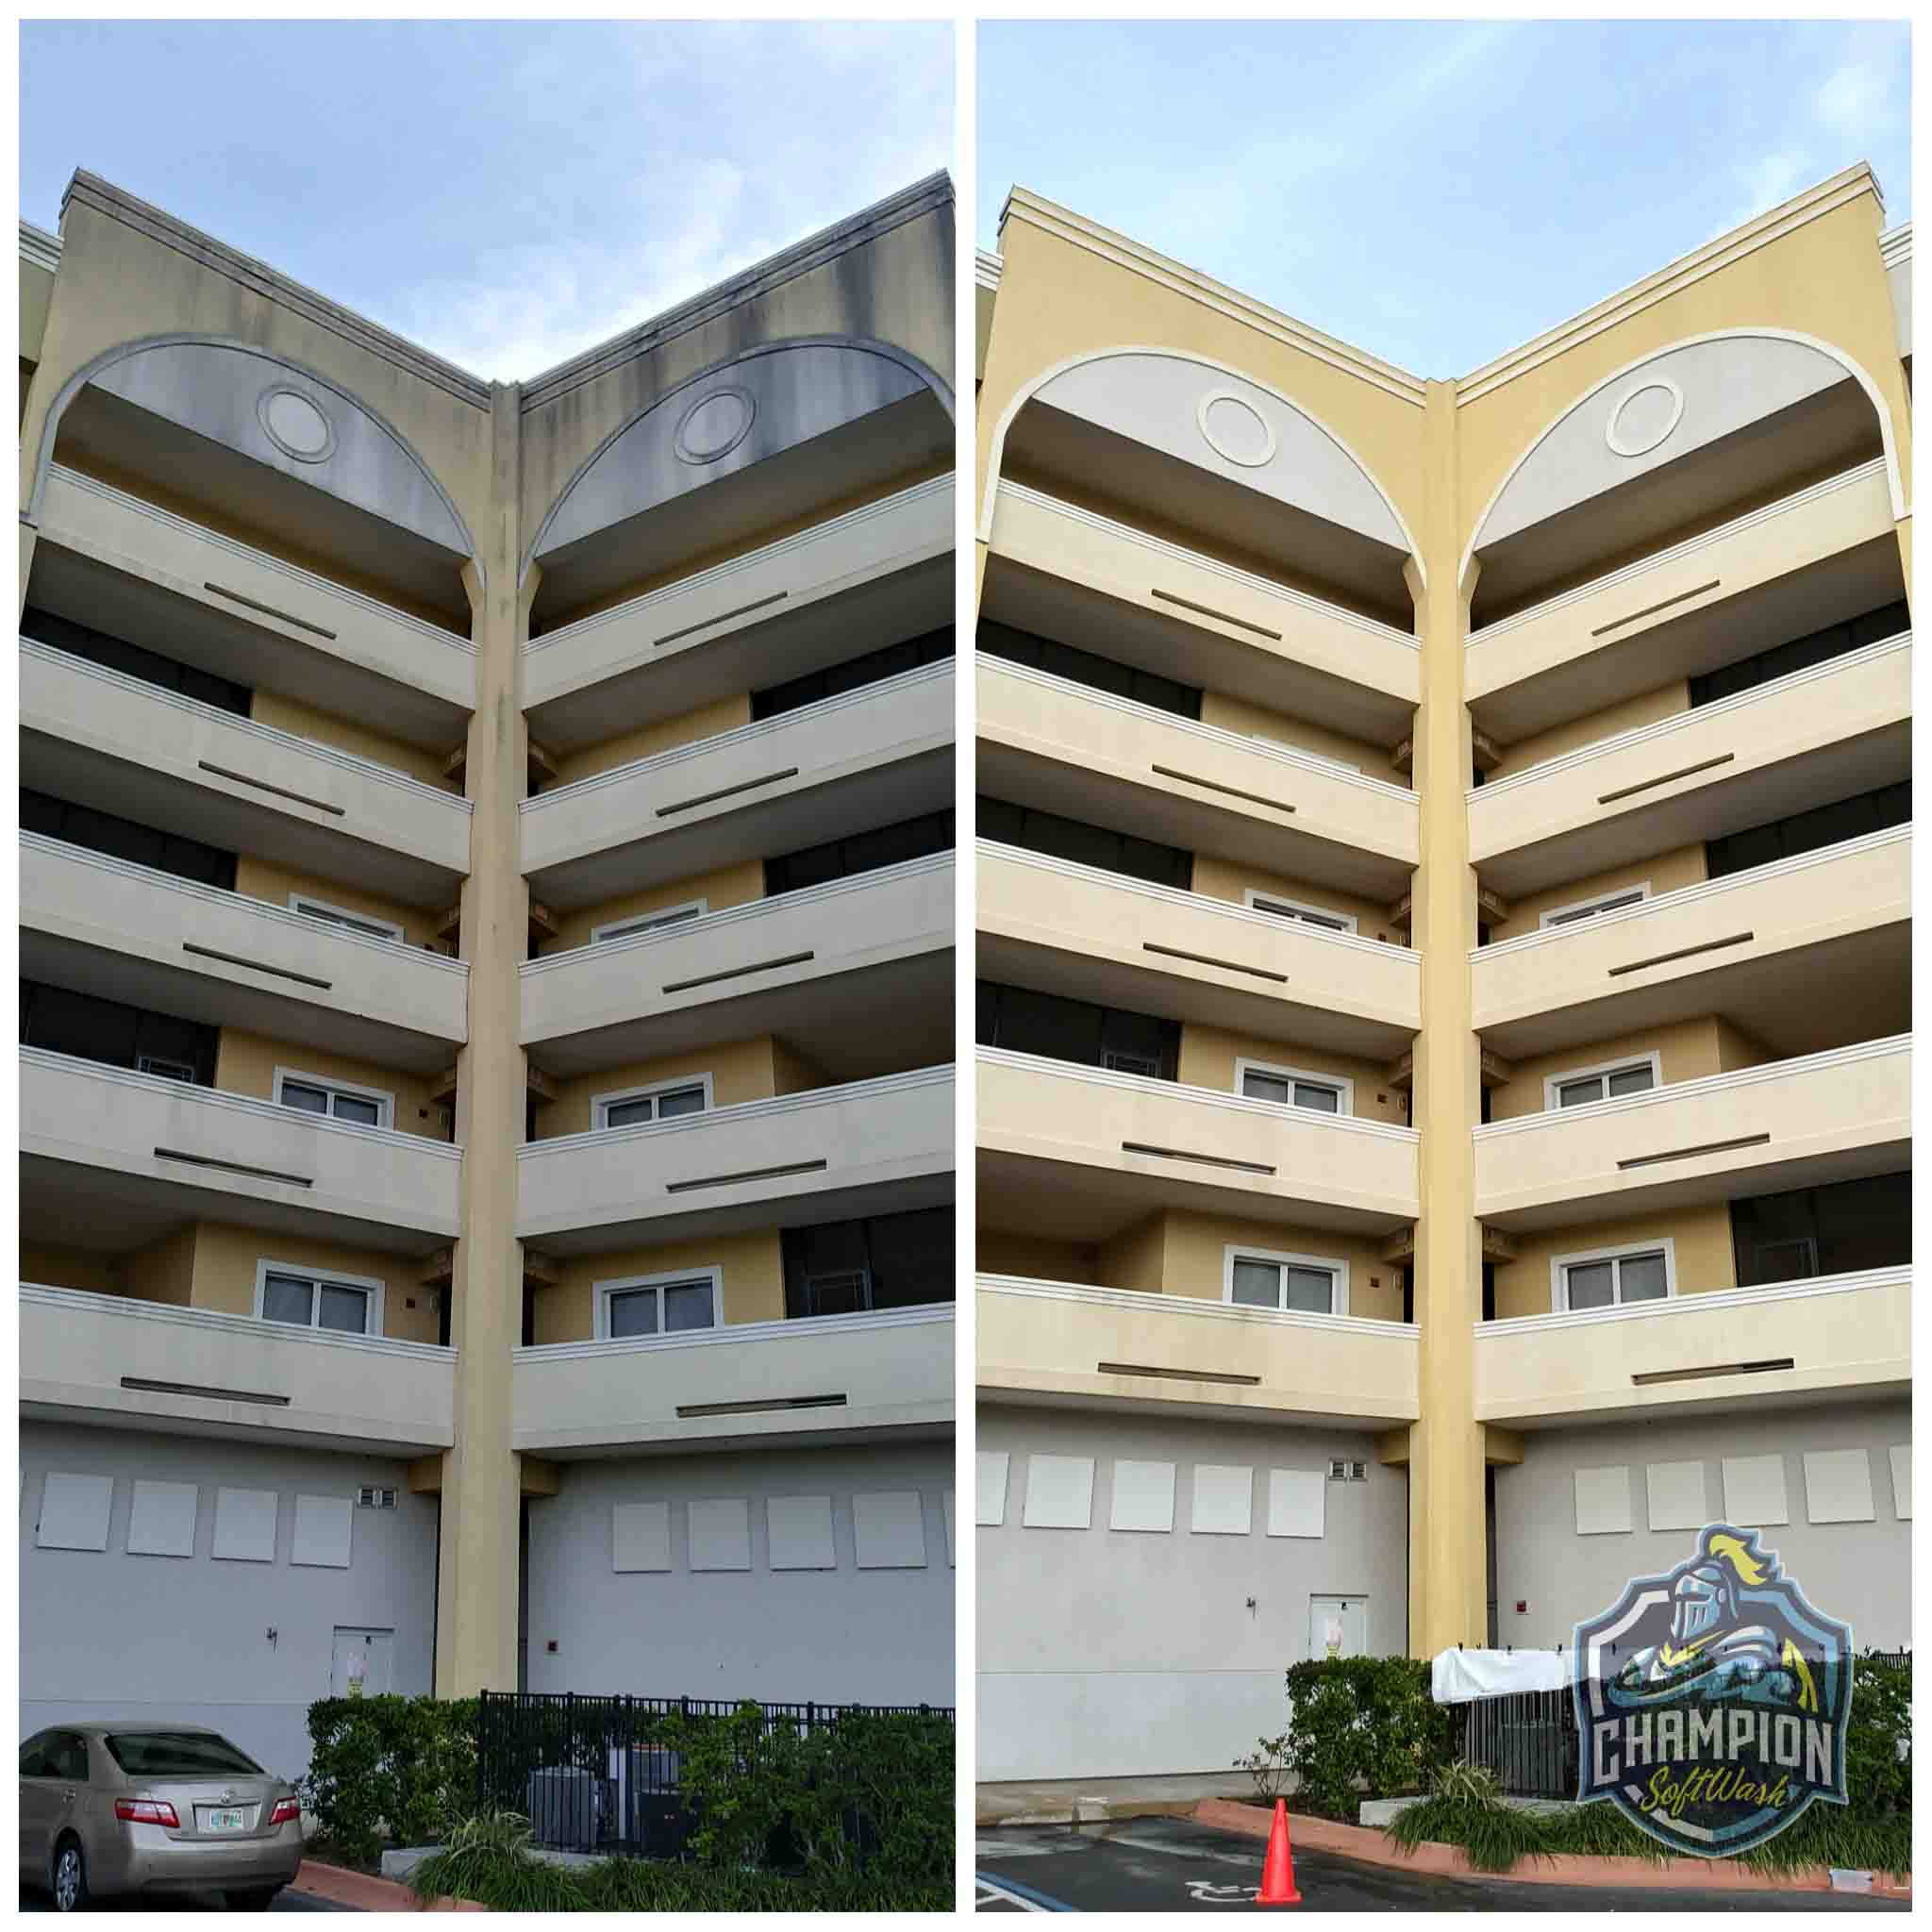 Algae and Mold removal pressure washing services for commercial properties, stucco cleaning, efis and dryvit cleaning